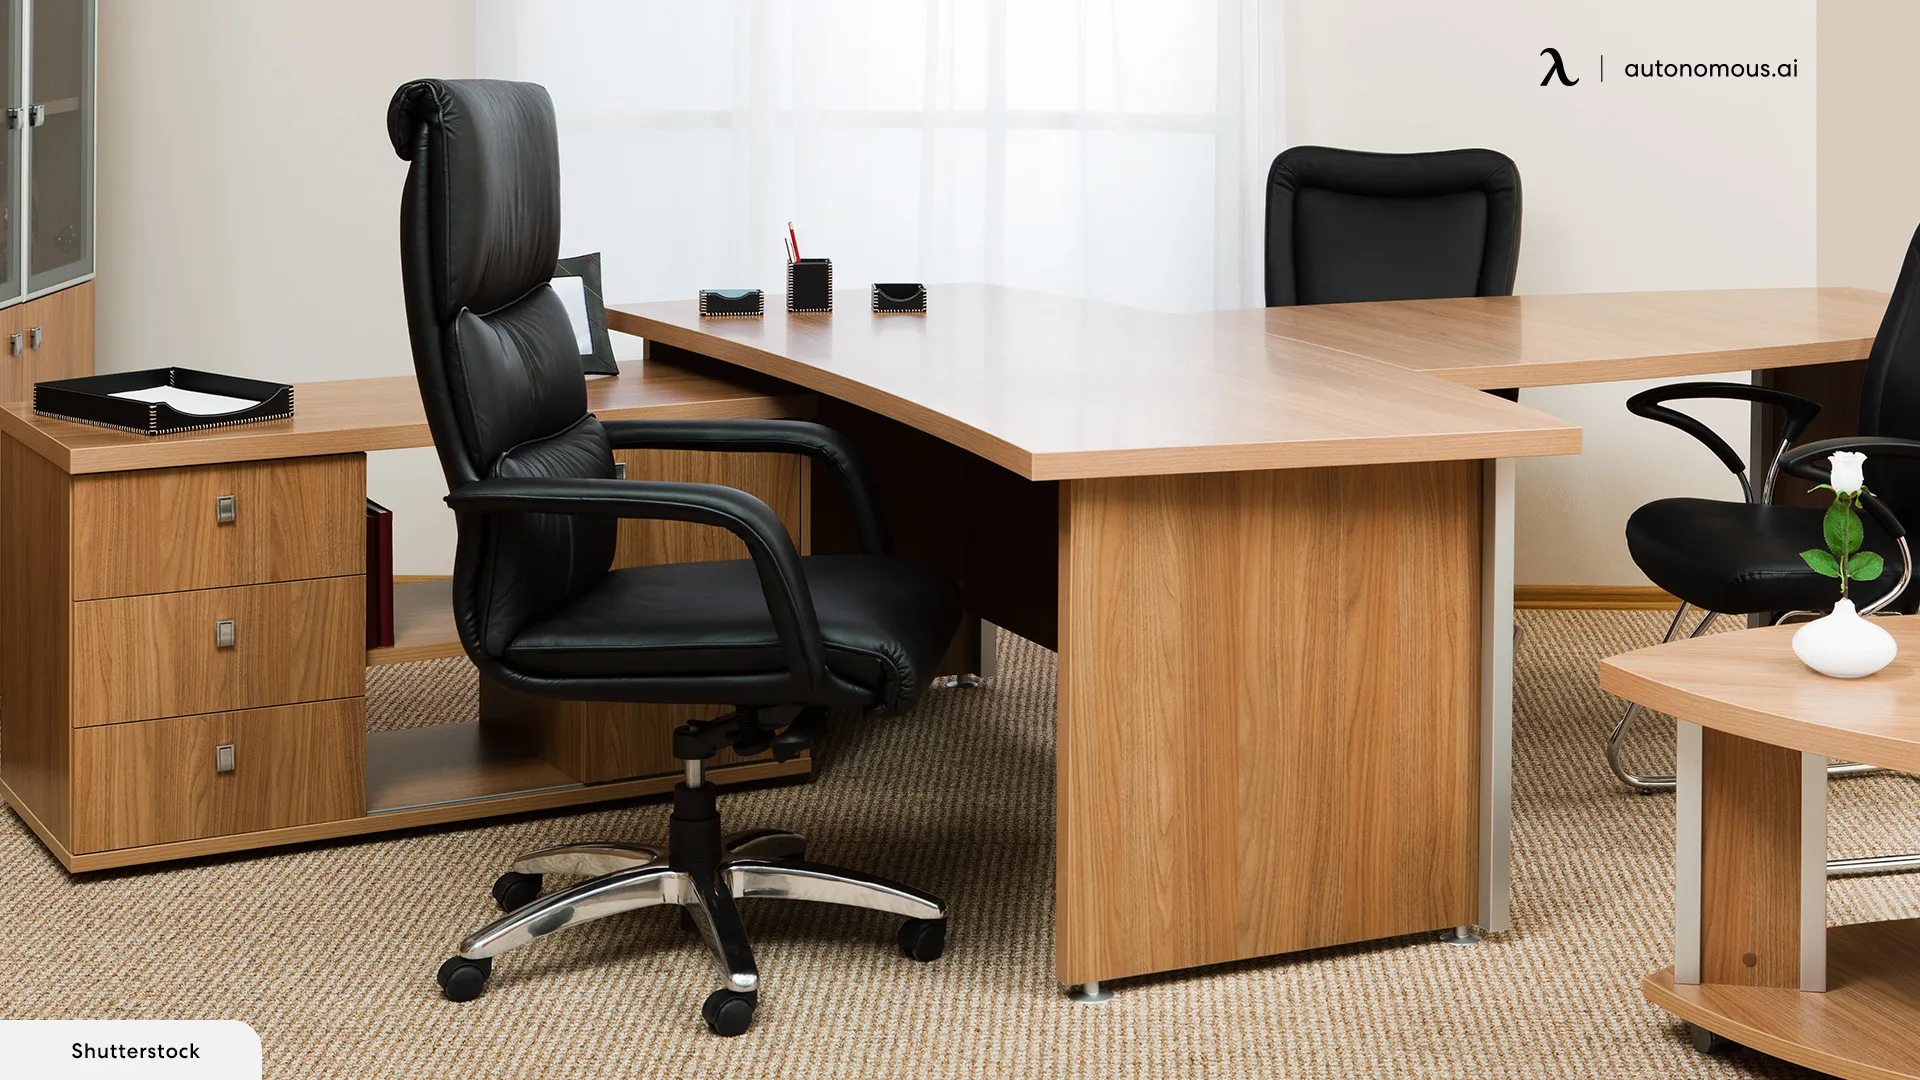 Should You Get a Genuine Leather or Mesh Office Chair?